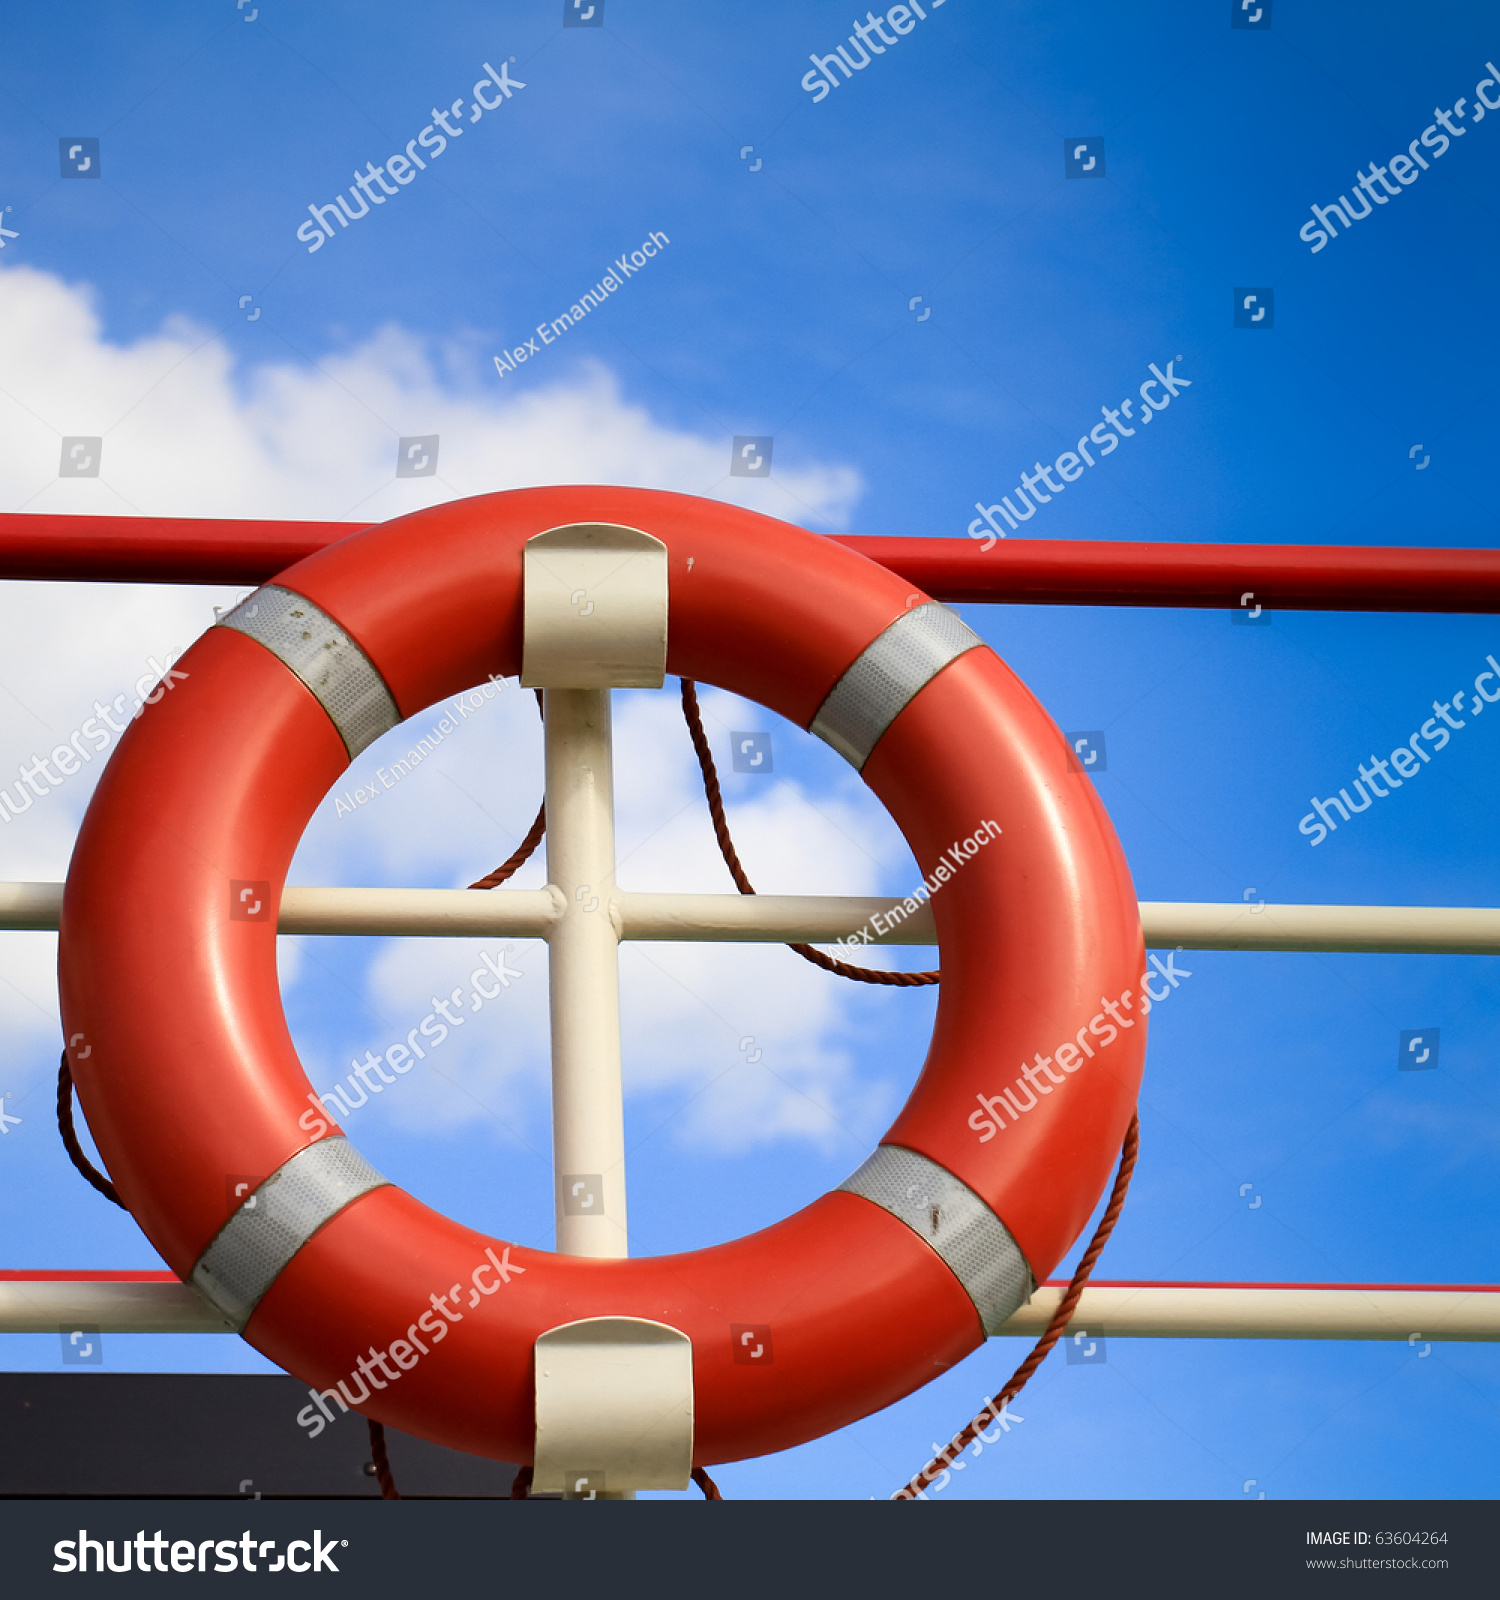 Red Rescue Ring Sky Stock Photo (Royalty Free) 63604264 - Shutterstock